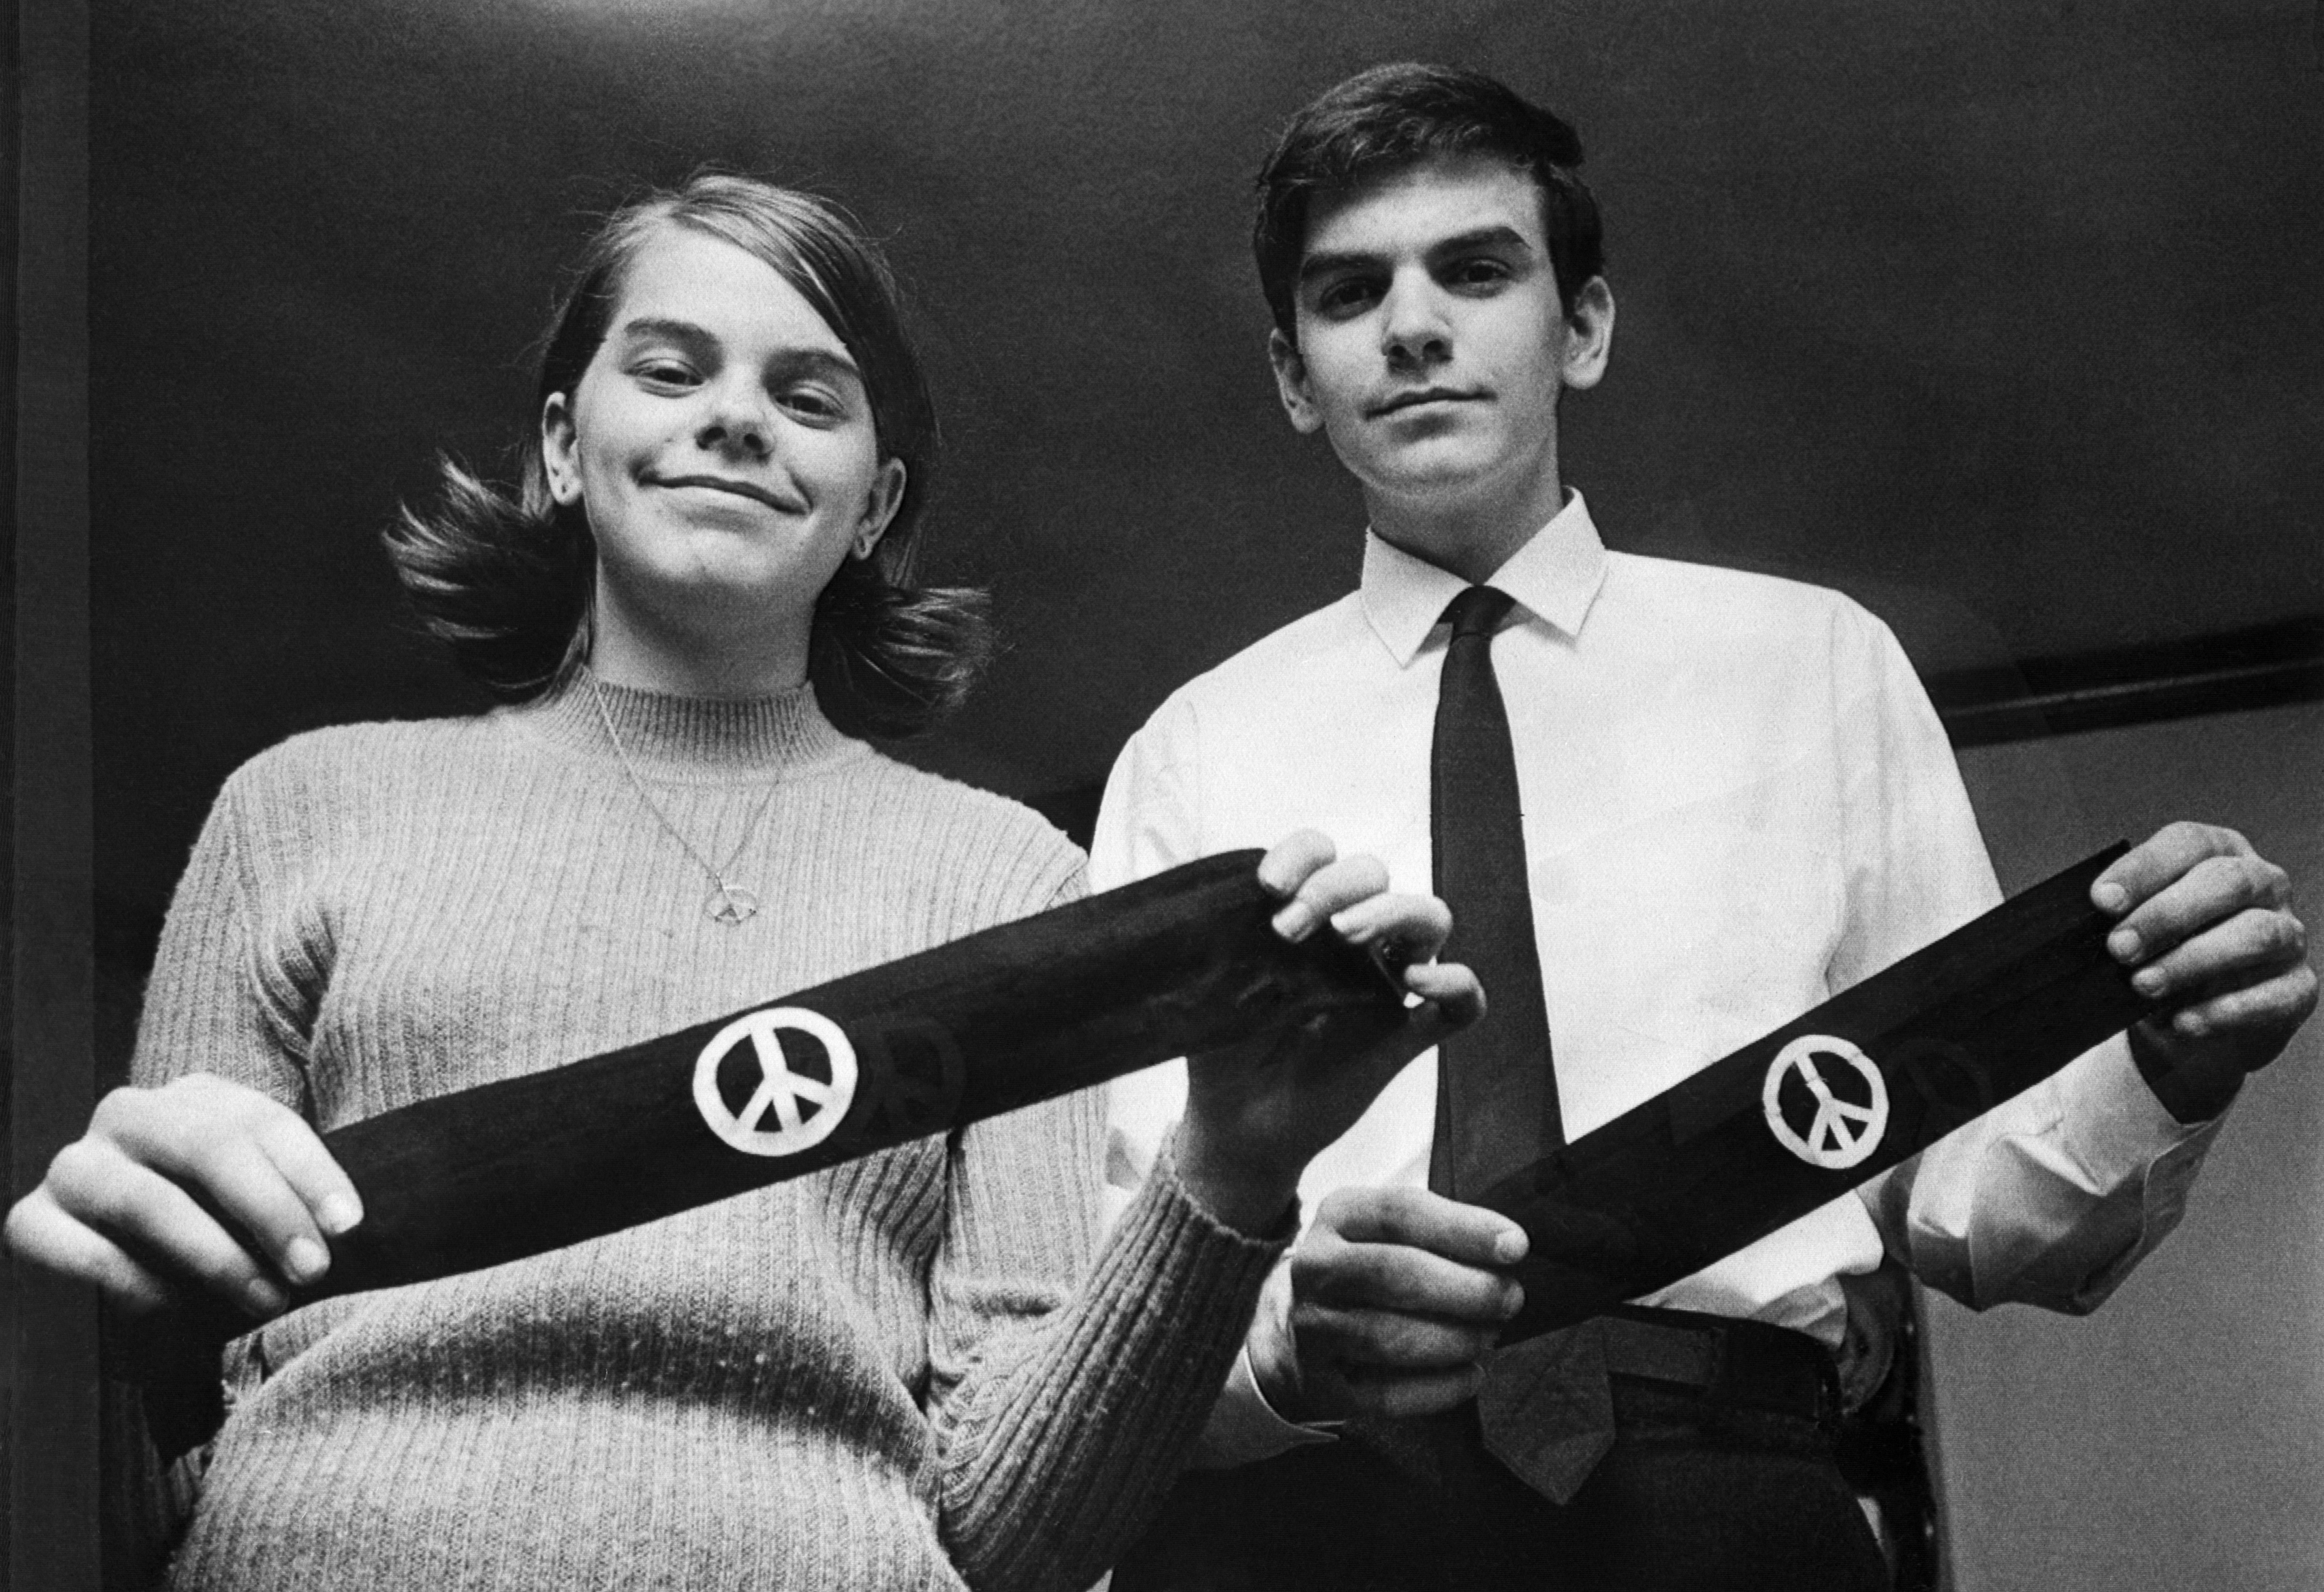 Des Moines, Iowa, students Mary Beth Tinker and her brother, John display two black armbands, the objects of the U.S. Supreme Court's agreement on March 4, 1968, to hear arguments on how far public schools may go in limiting the wearing of political symbols. (Bettmann—Getty Images)